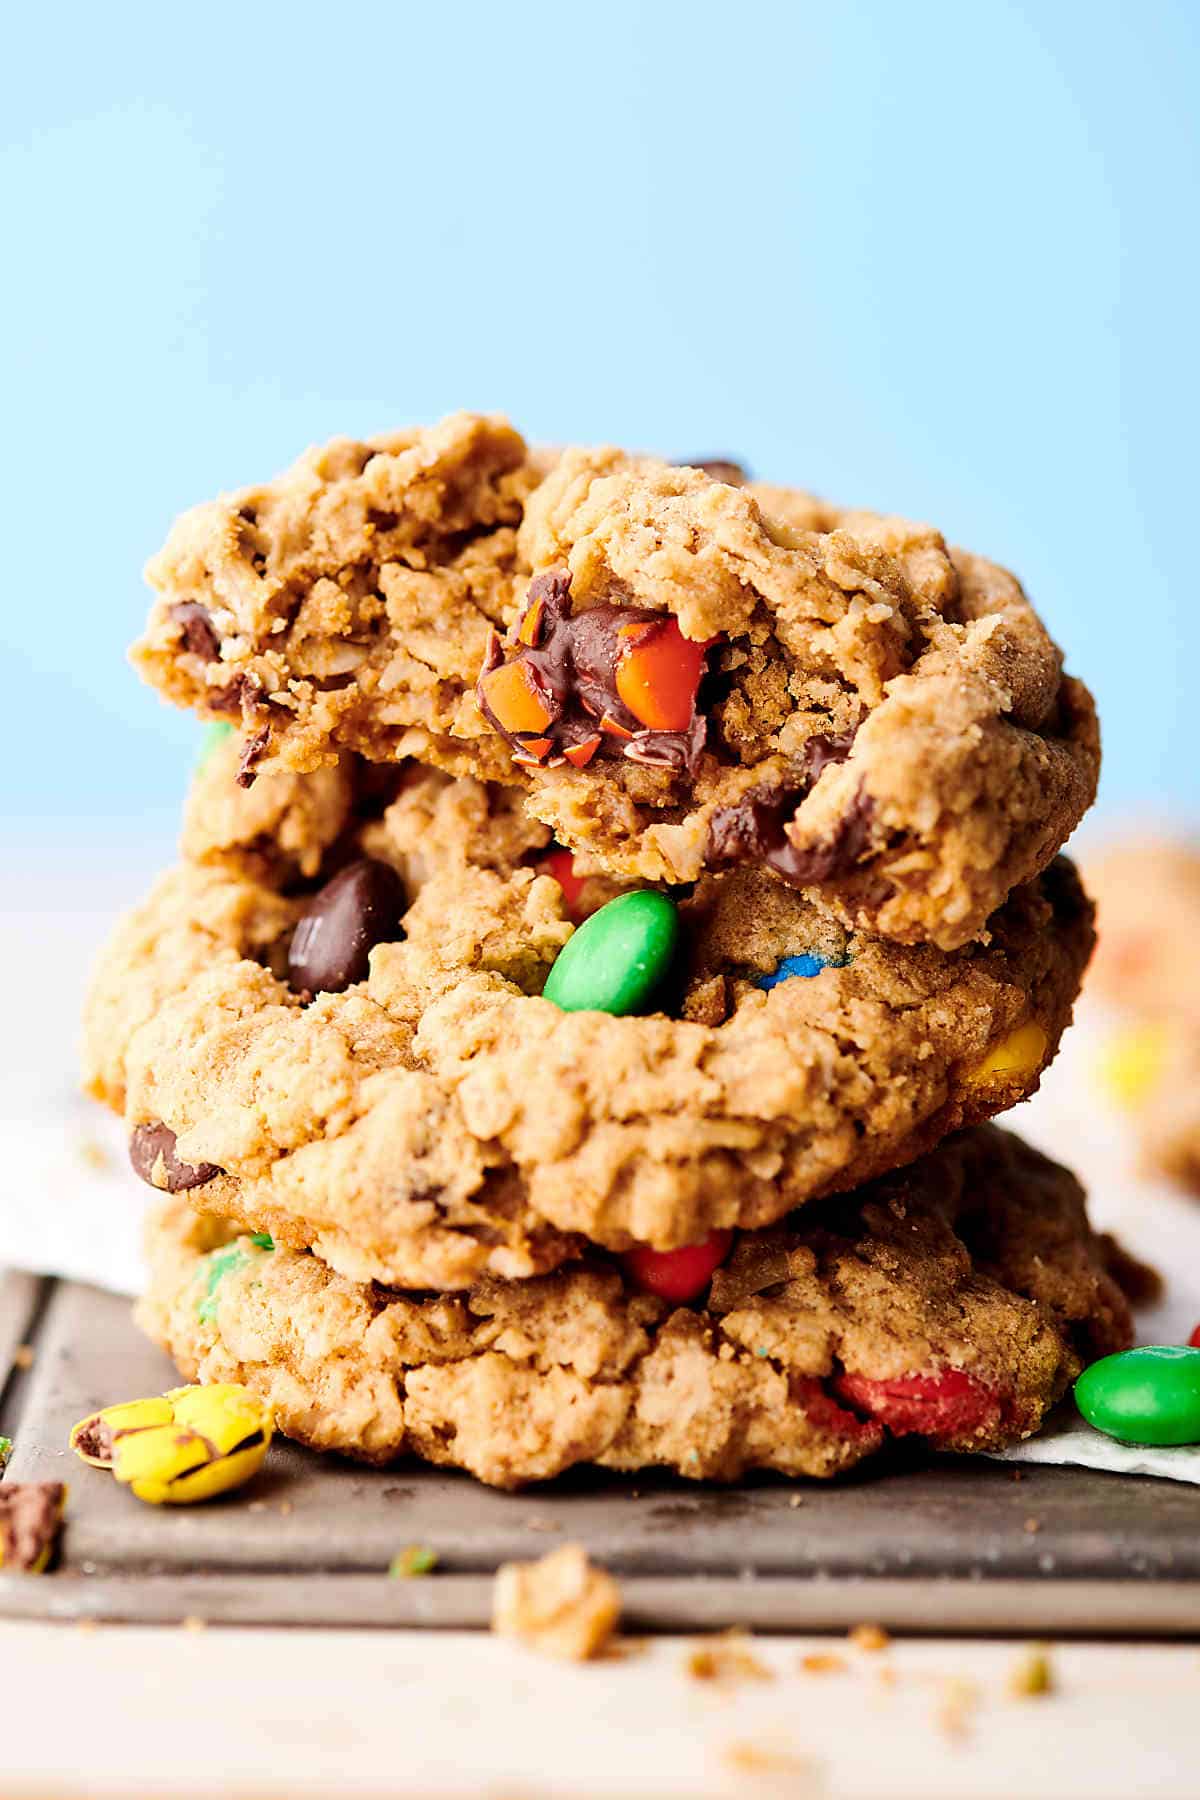 Best Monster Cookies Recipe - Soft, Chewy and Ready in 30 Minutes